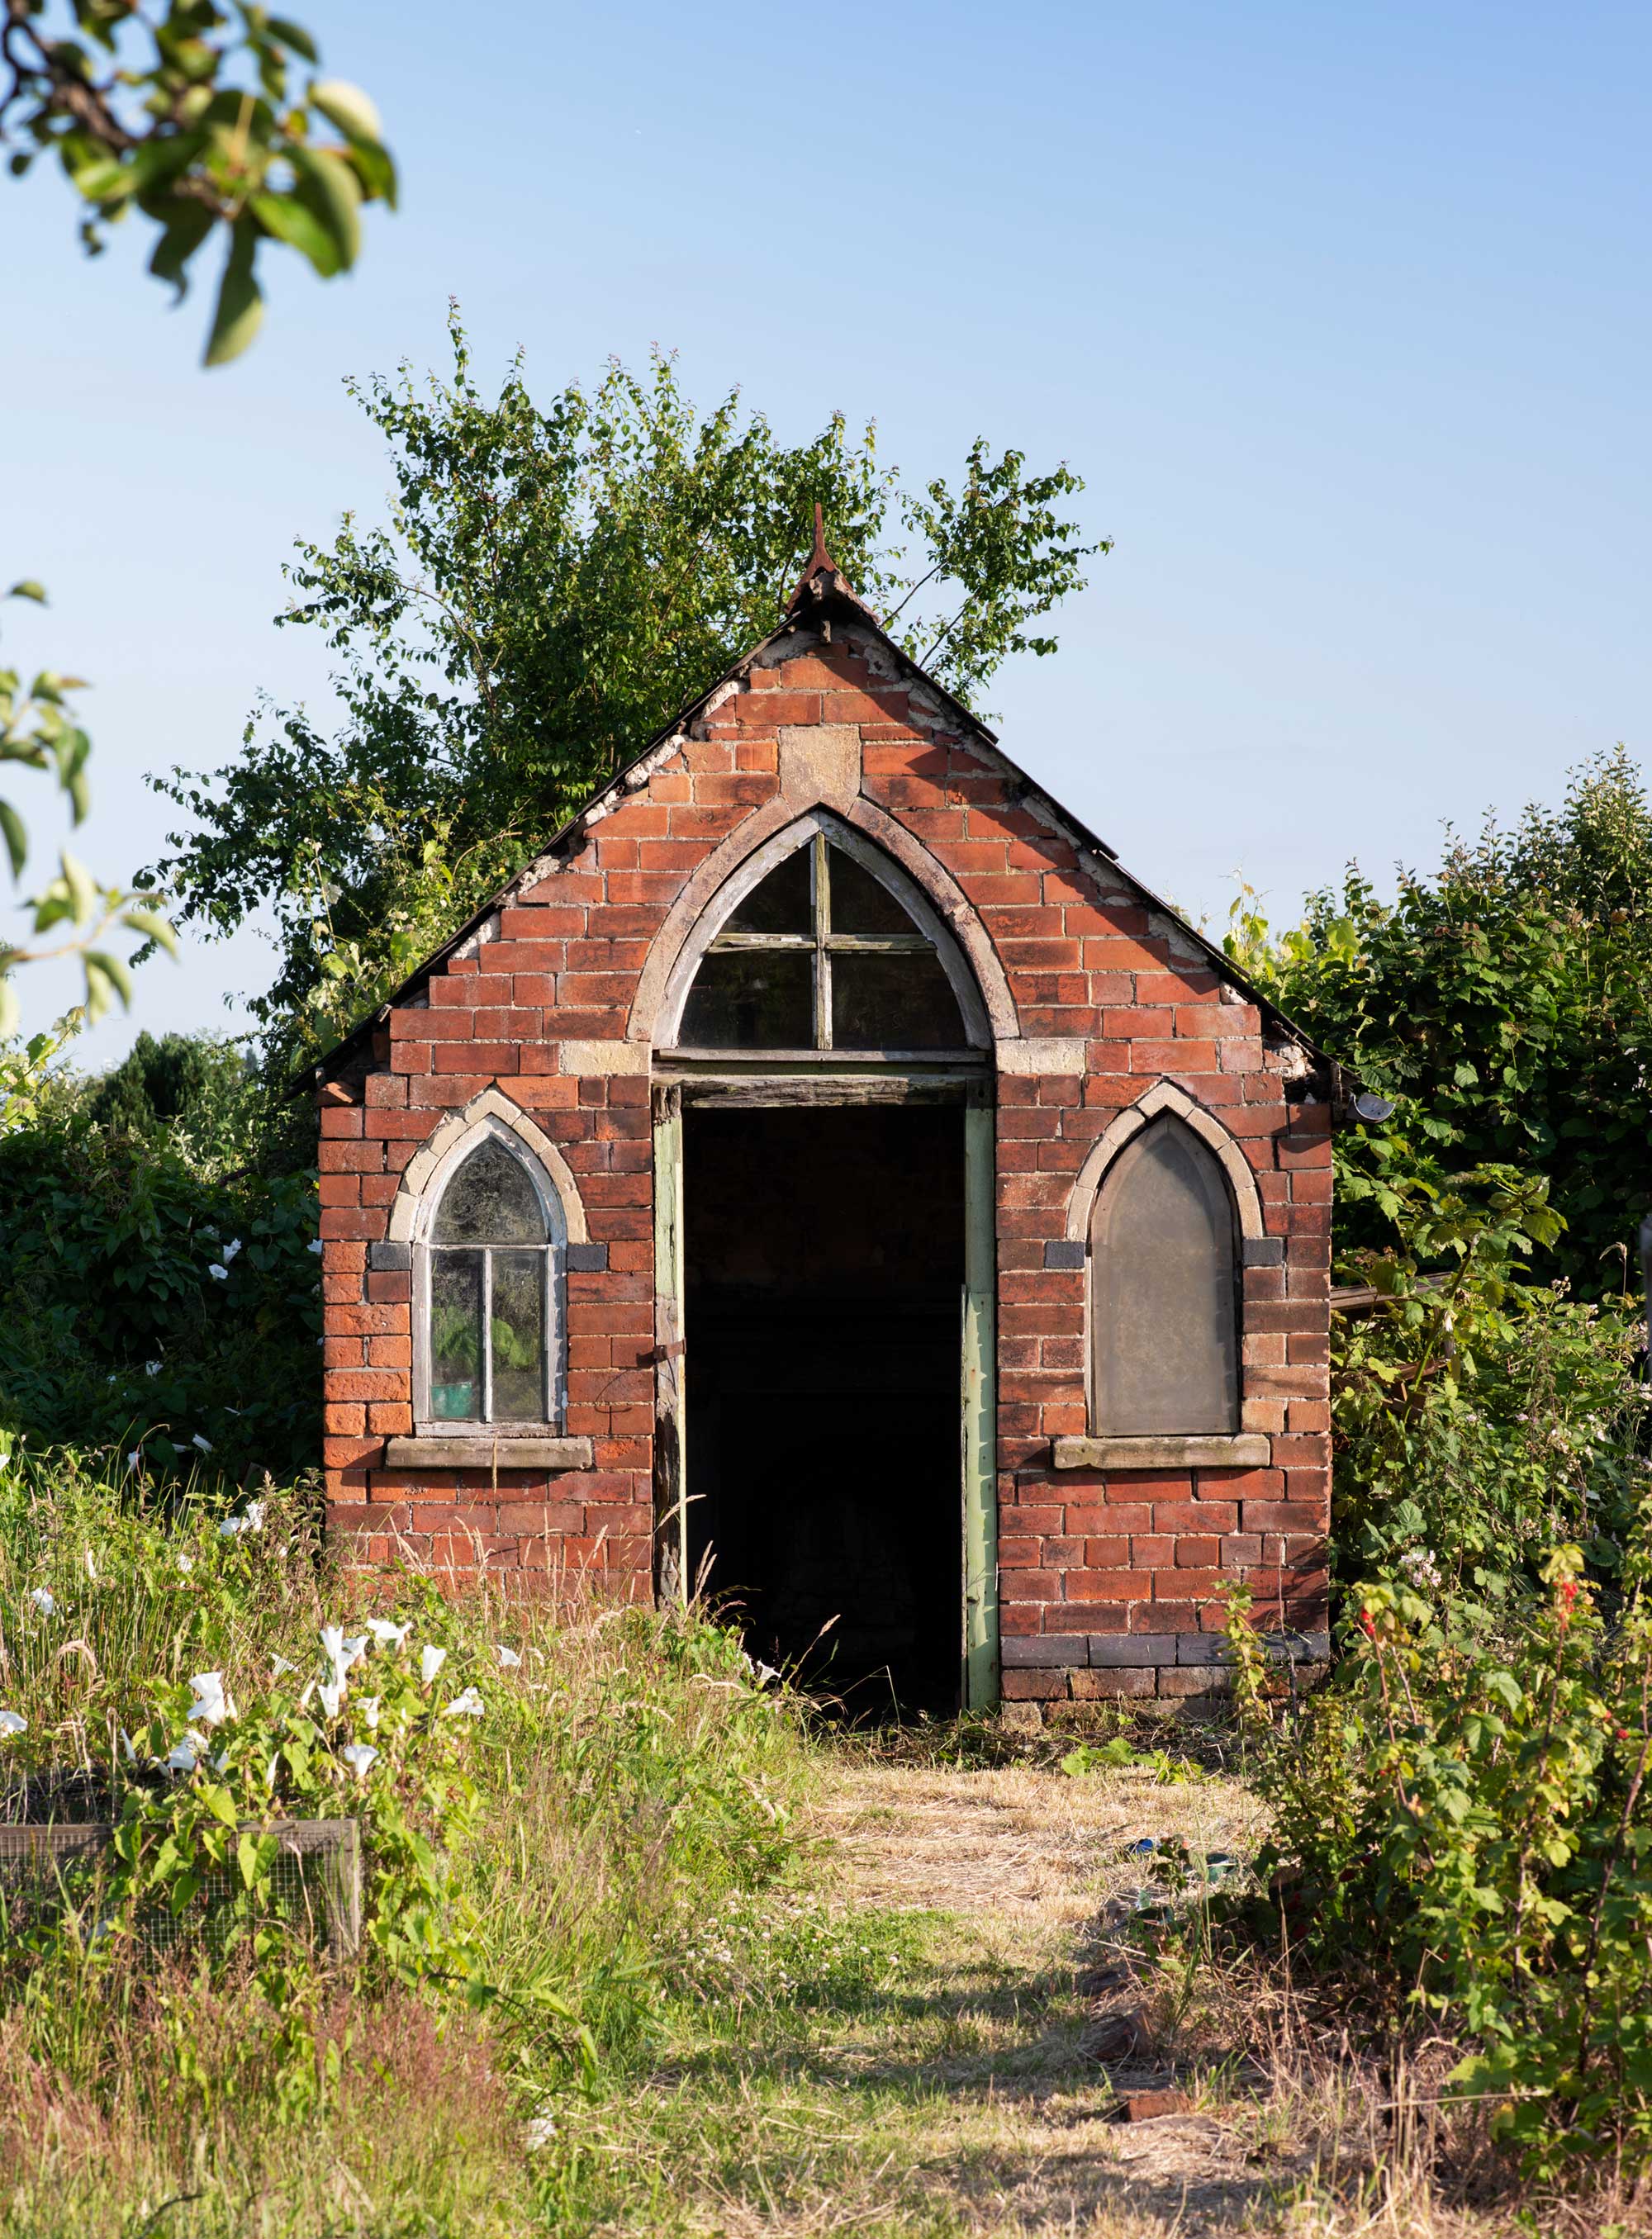 A small brick building on an allotment.